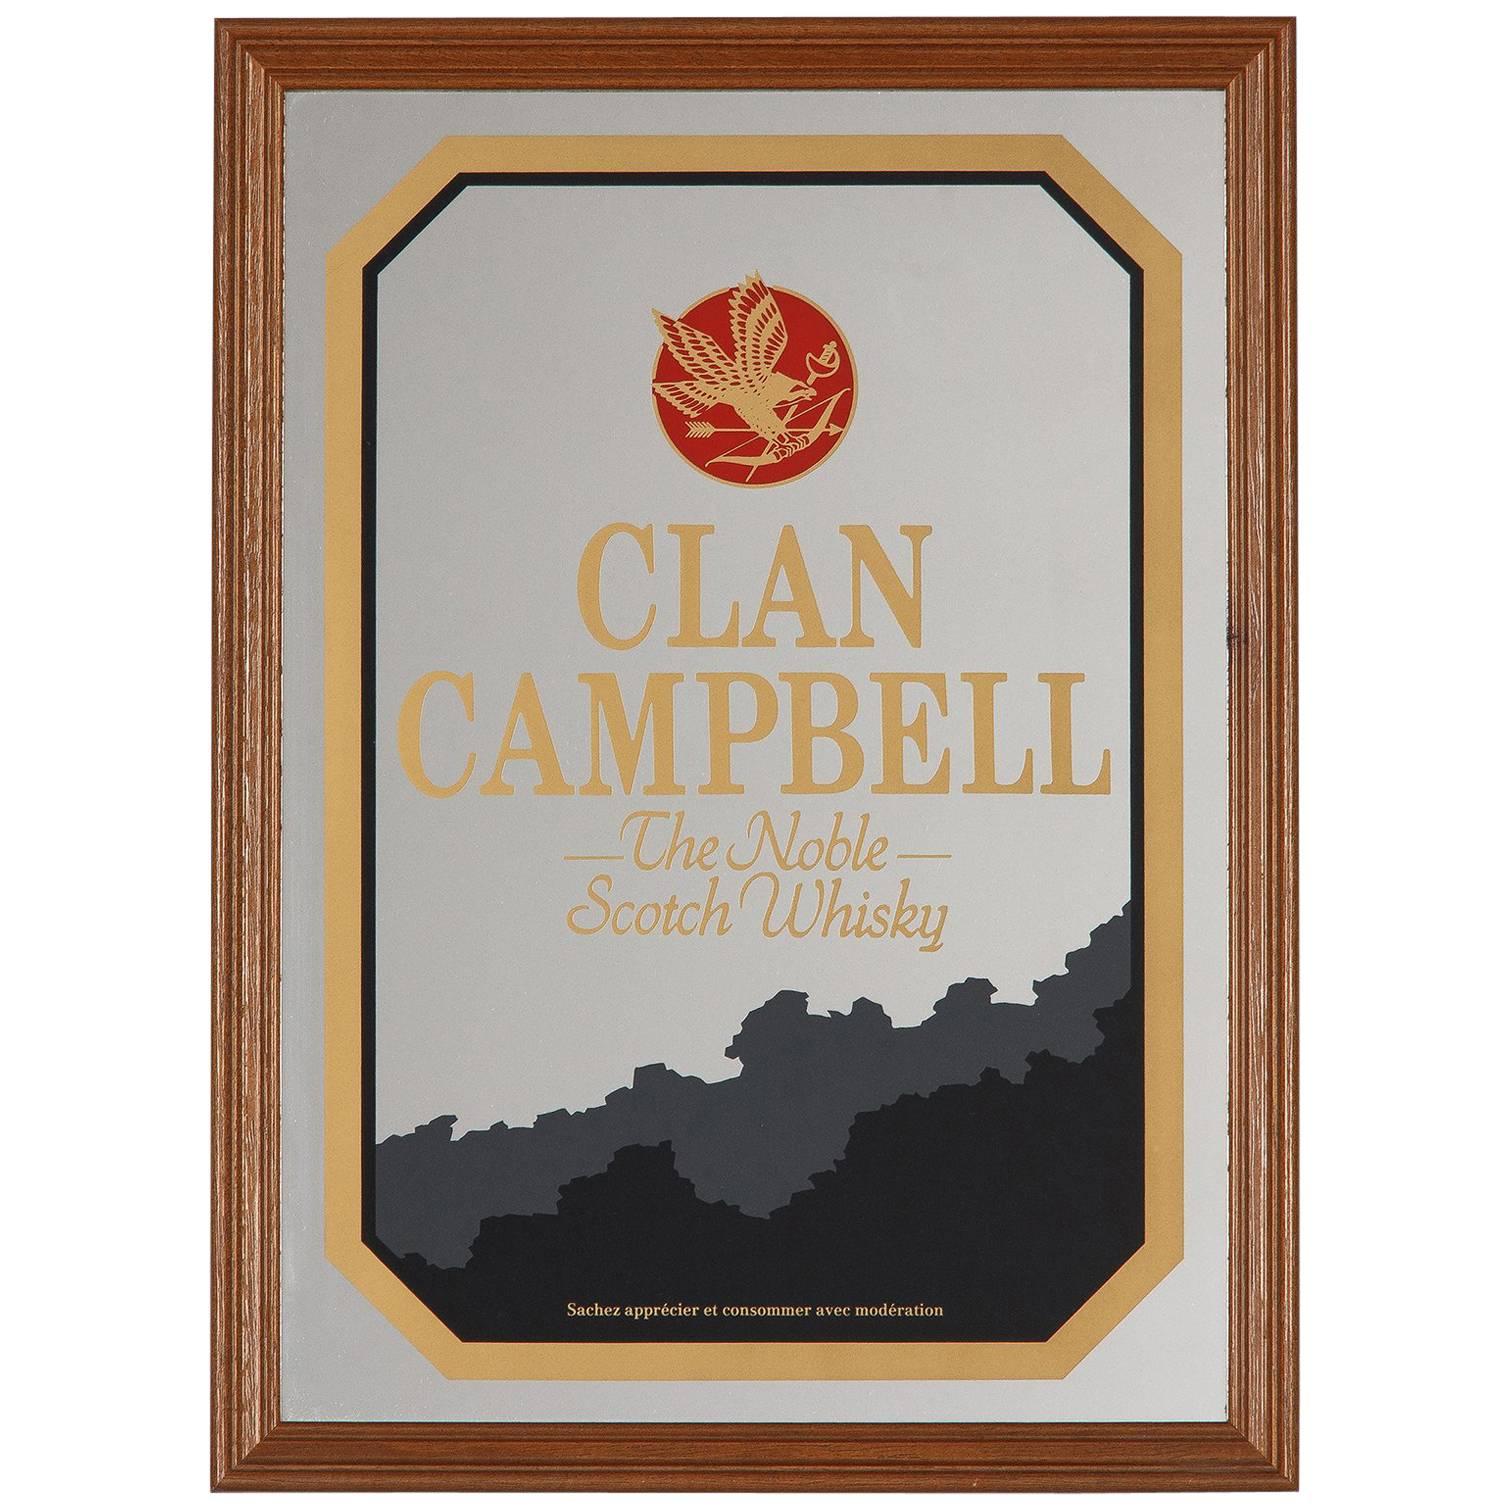 Vintage Frame with Mirrored Advertising Sign for Clan Campbell Scotch, 1980s